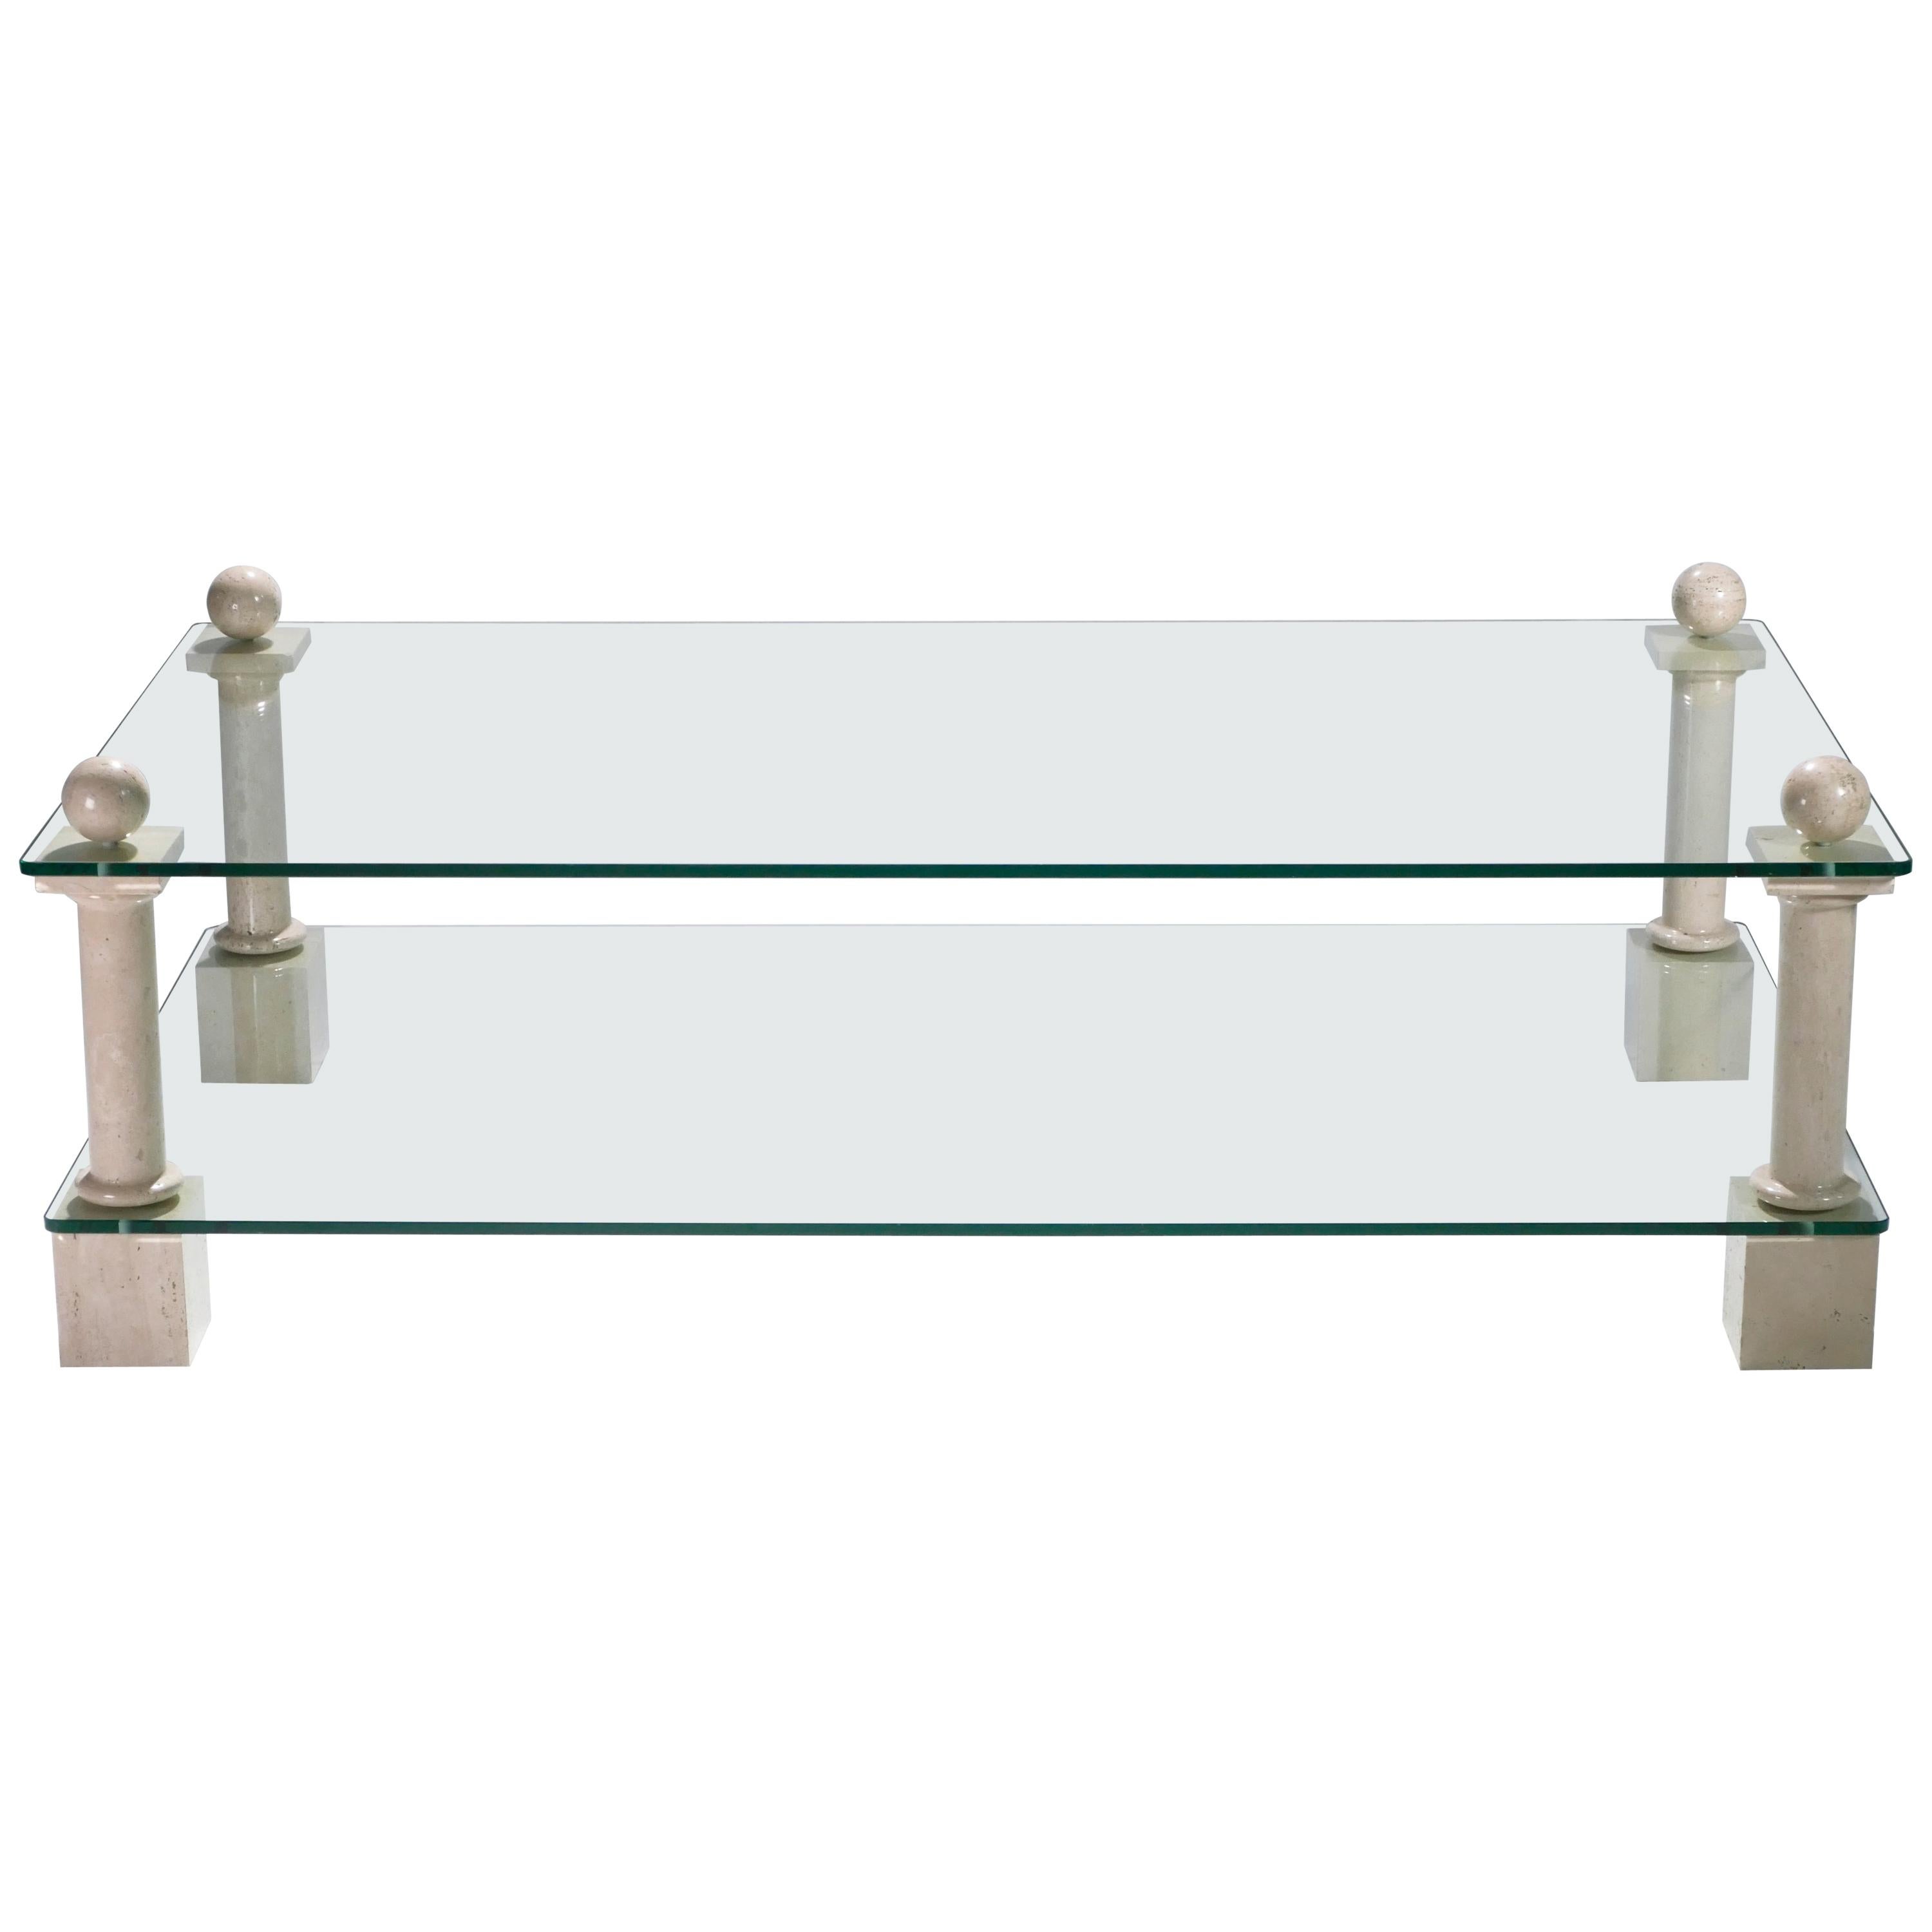 Crafted by French interior designer Philippe Barbier, this rare large coffee table mixes materials in the most sophisticated way. Tiered, thick glass slabs are supported by elegant travertine feet. Decorators might choose to place this French